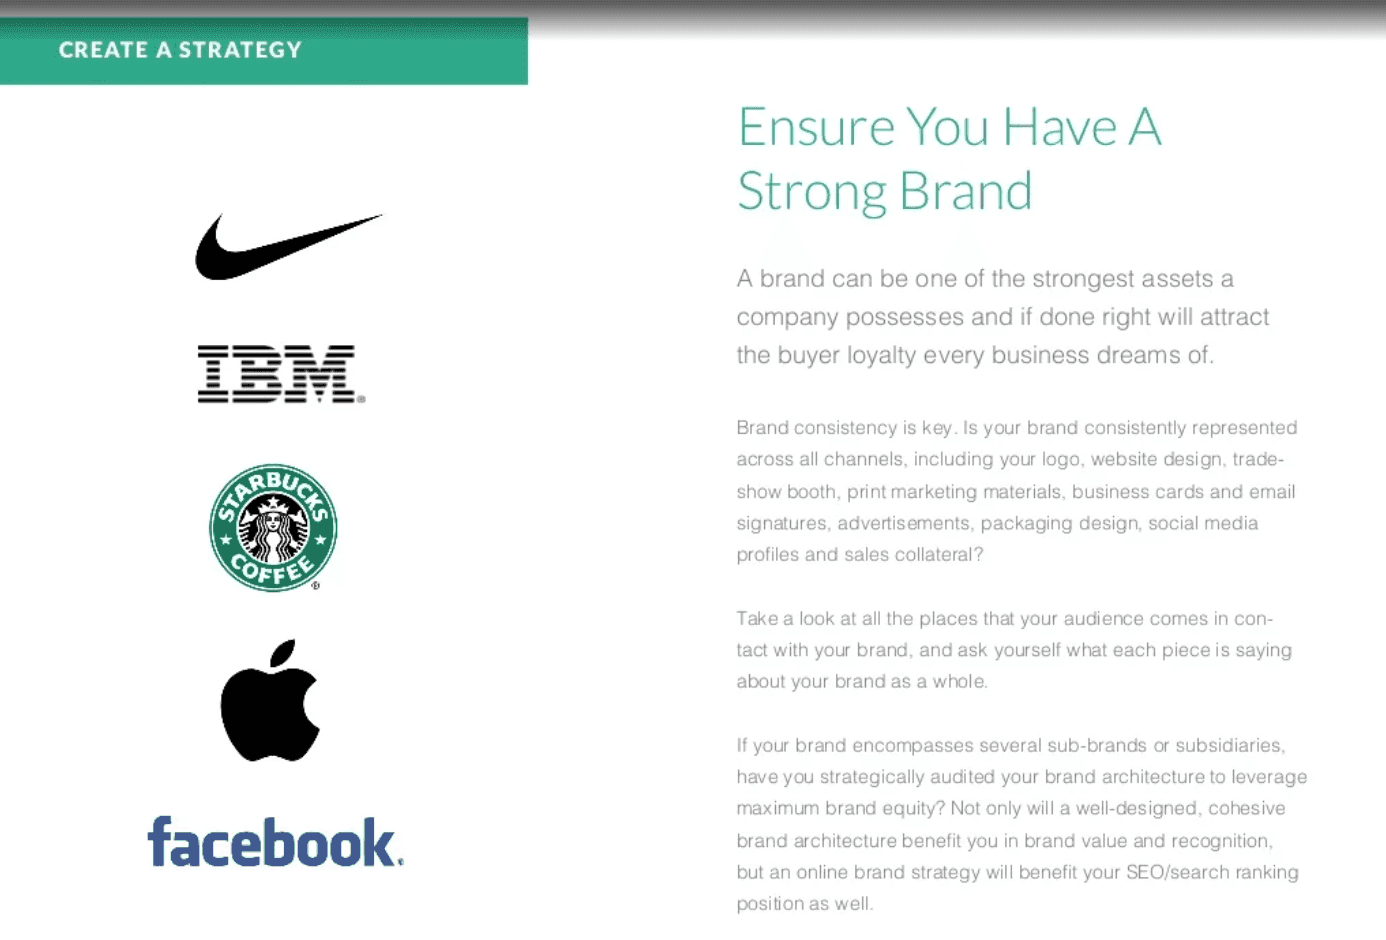 Example of creating a brand strategy